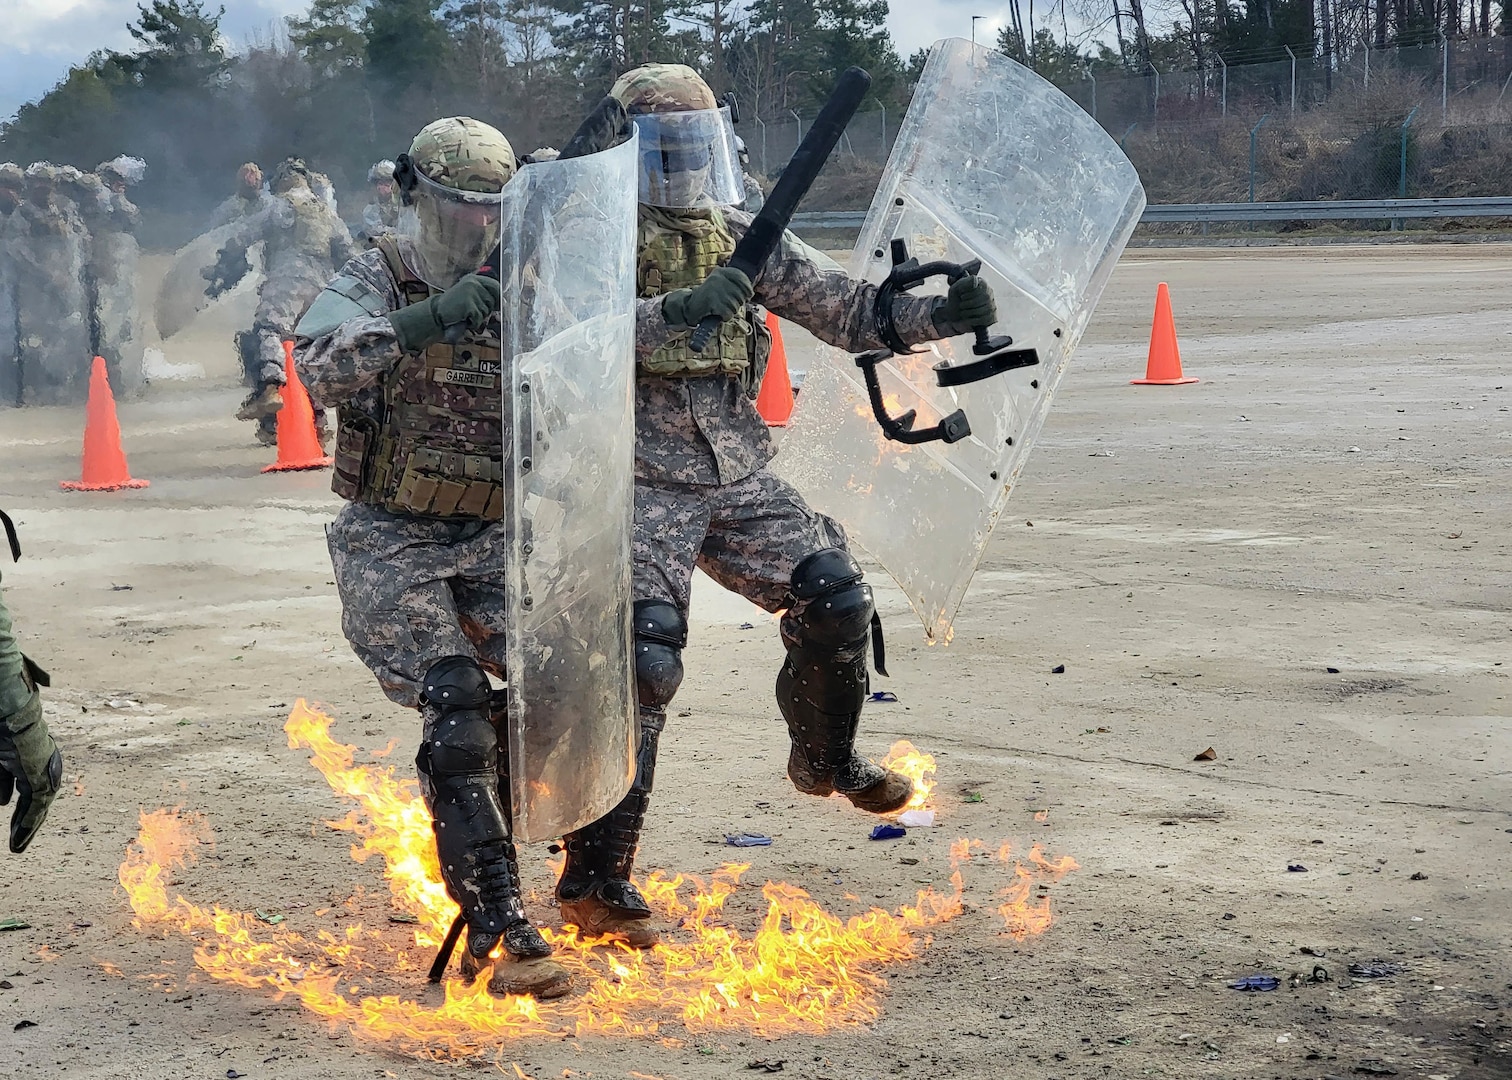 U.S. Army Soldiers with the Kentucky National Guard’s 1st Battalion, 149th Infantry Regiment, 116th Infantry Brigade Combat Team, 29th Infantry Division, conduct fire phobia training at the Joint Multinational Readiness Center, Hohenfels, Germany, Feb. 11, 2022. The training provided the Kentucky Citizen-Soldiers with the skills and confidence to respond to civil unrest where incendiary devices may be used.